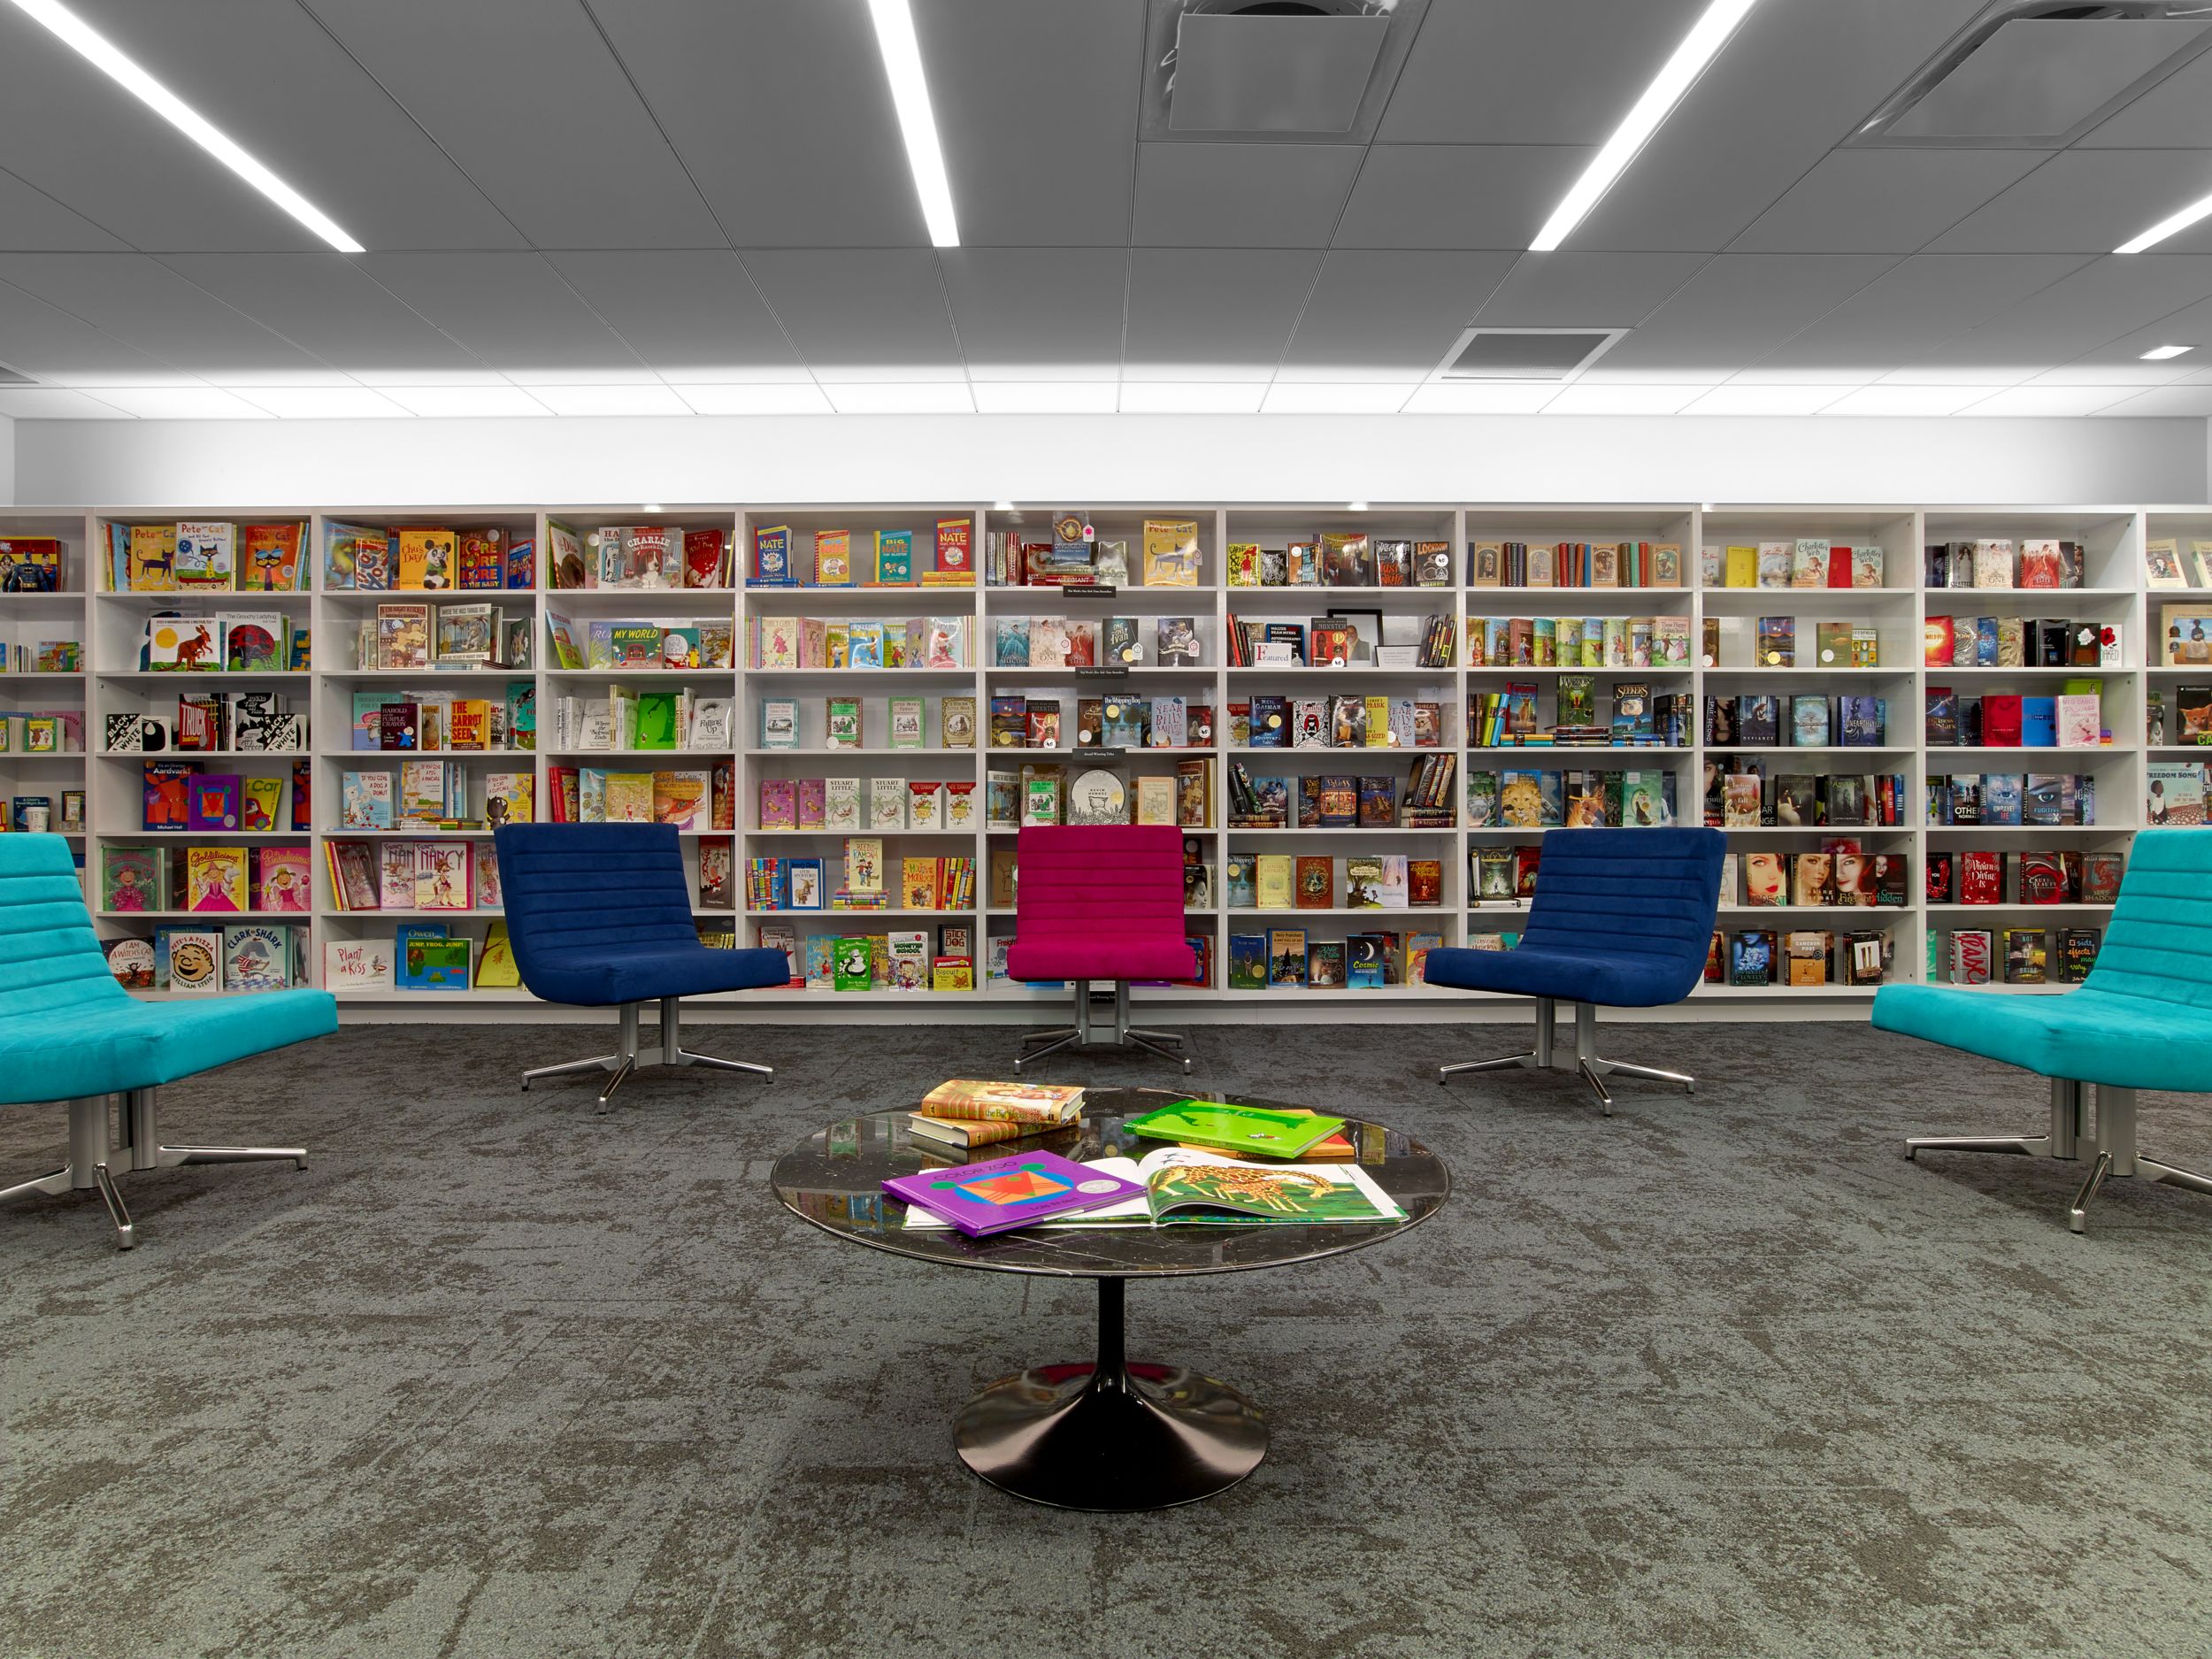 image Interface B603 carpet tile in area with bookshelves and colorful chairs numéro 6